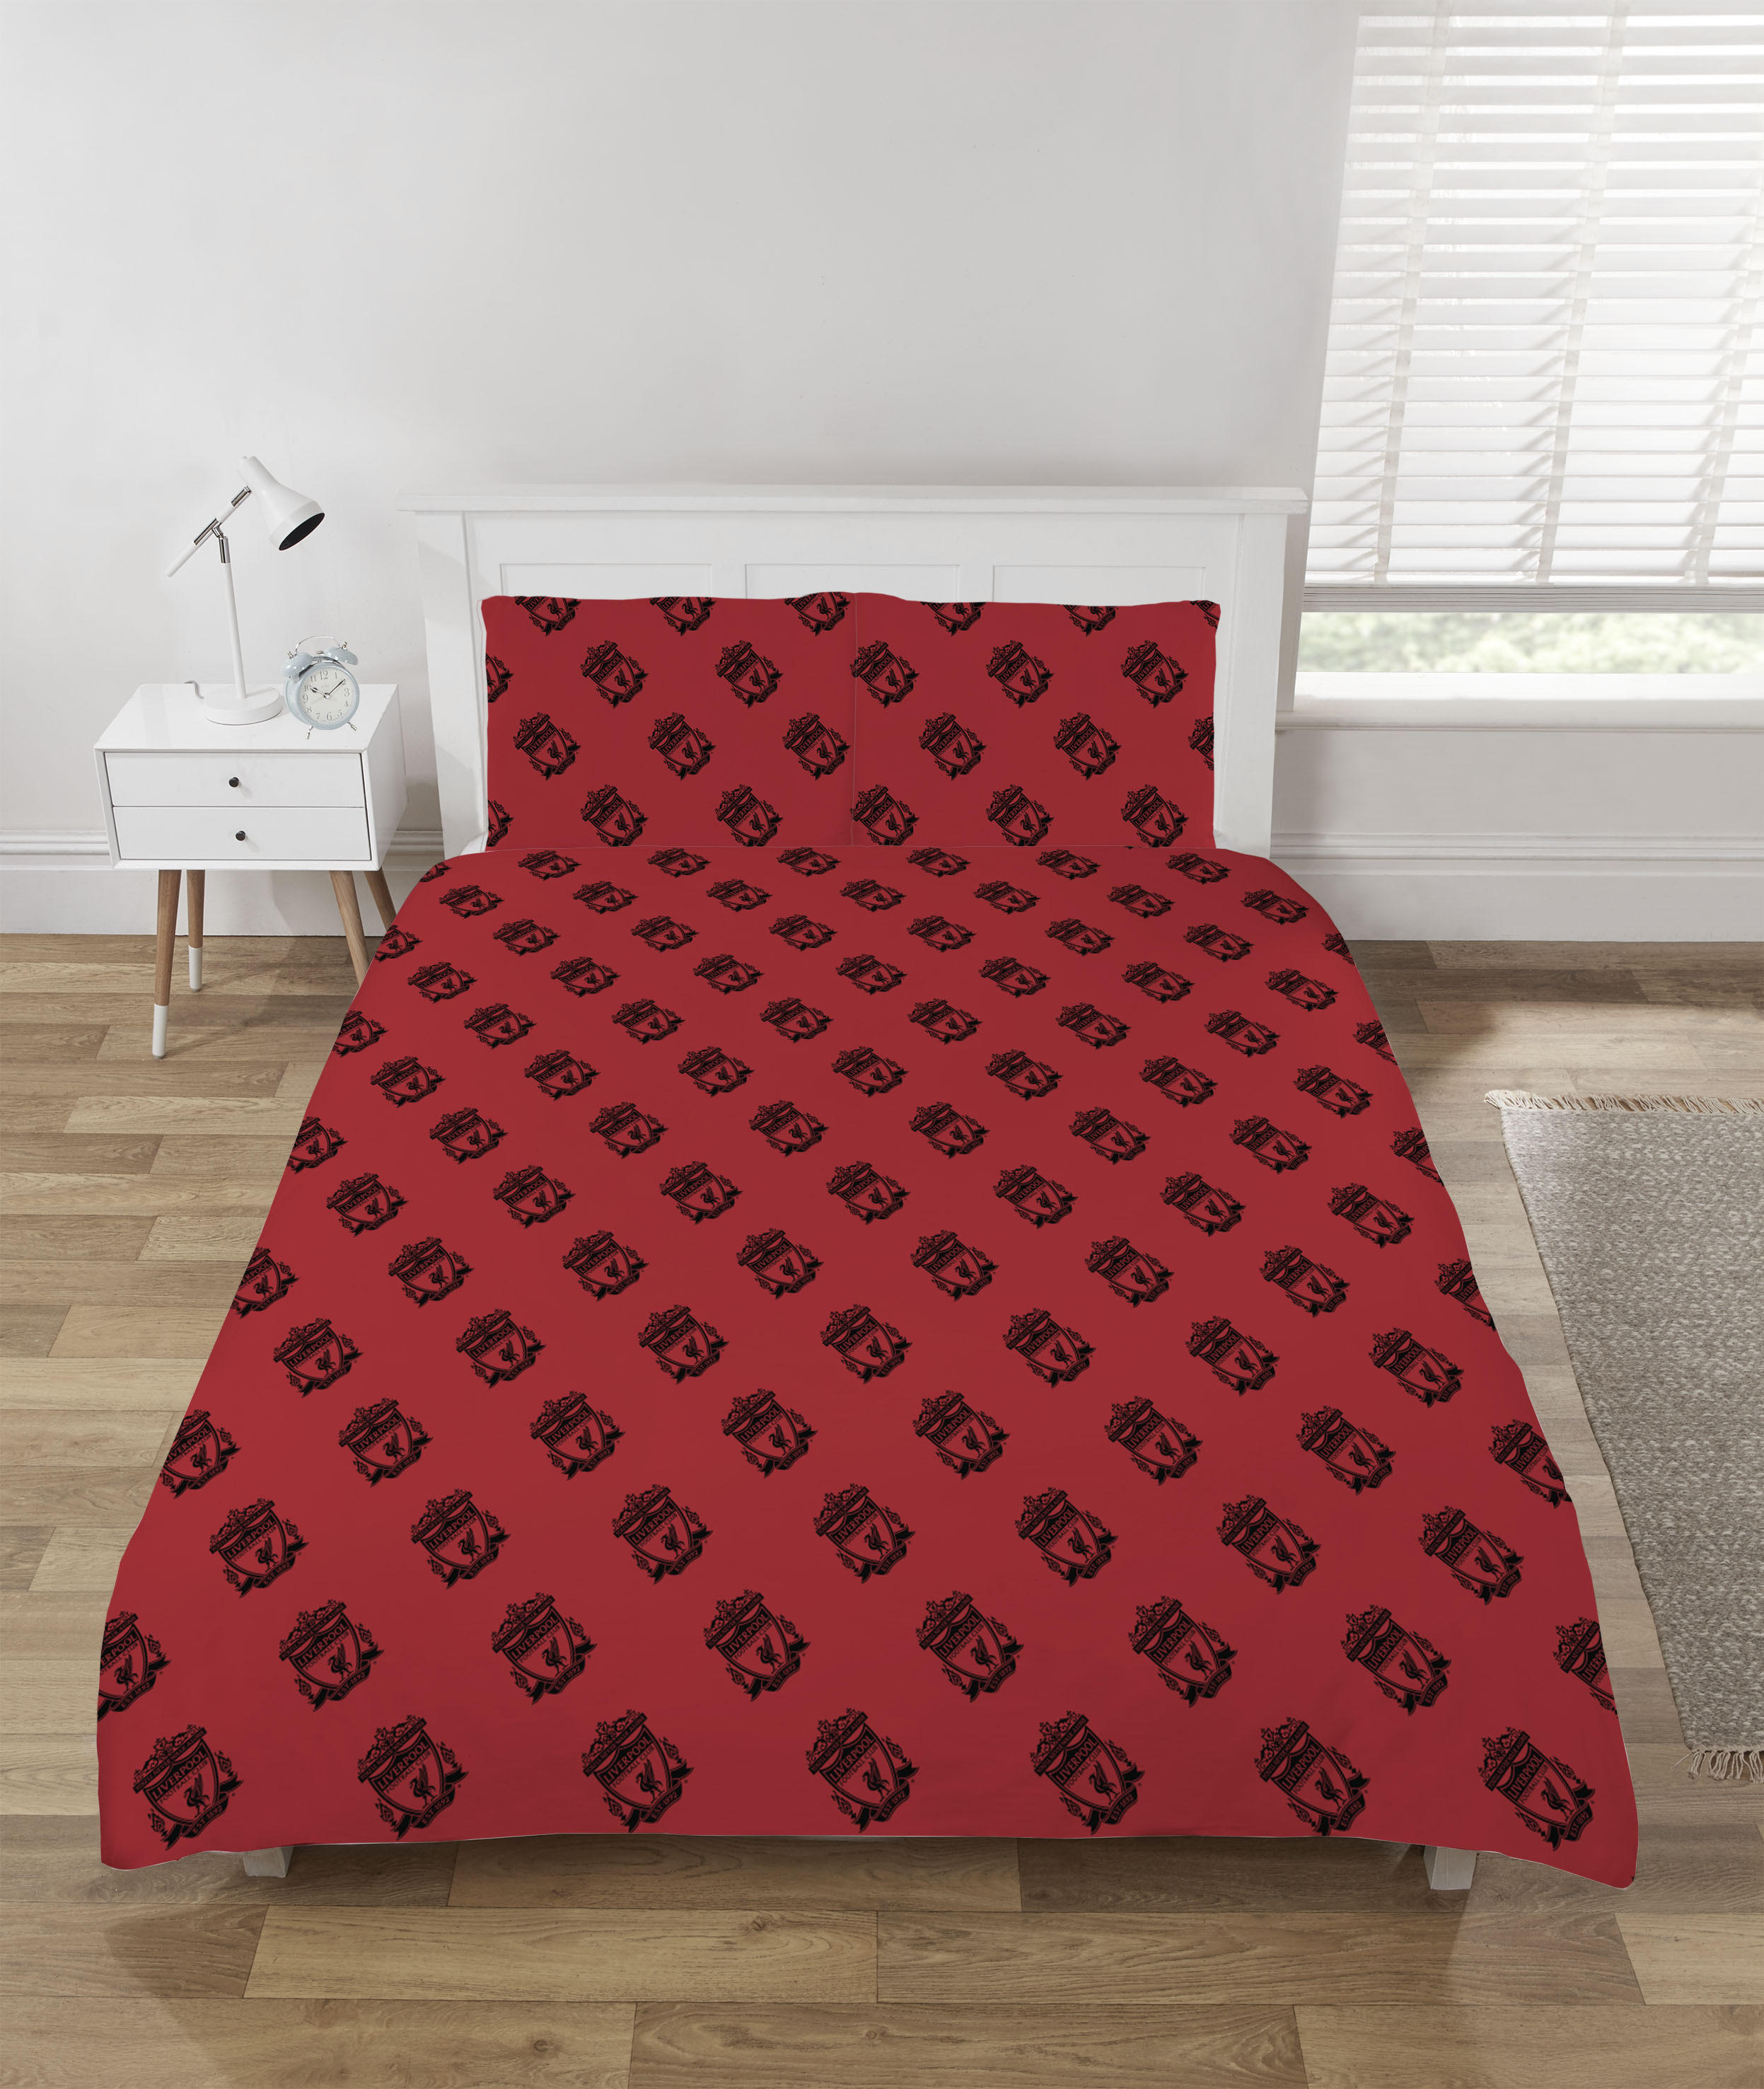 Liverpool Fc Mesh Football Panel Official Double Bed Duvet Quilt Cover Set